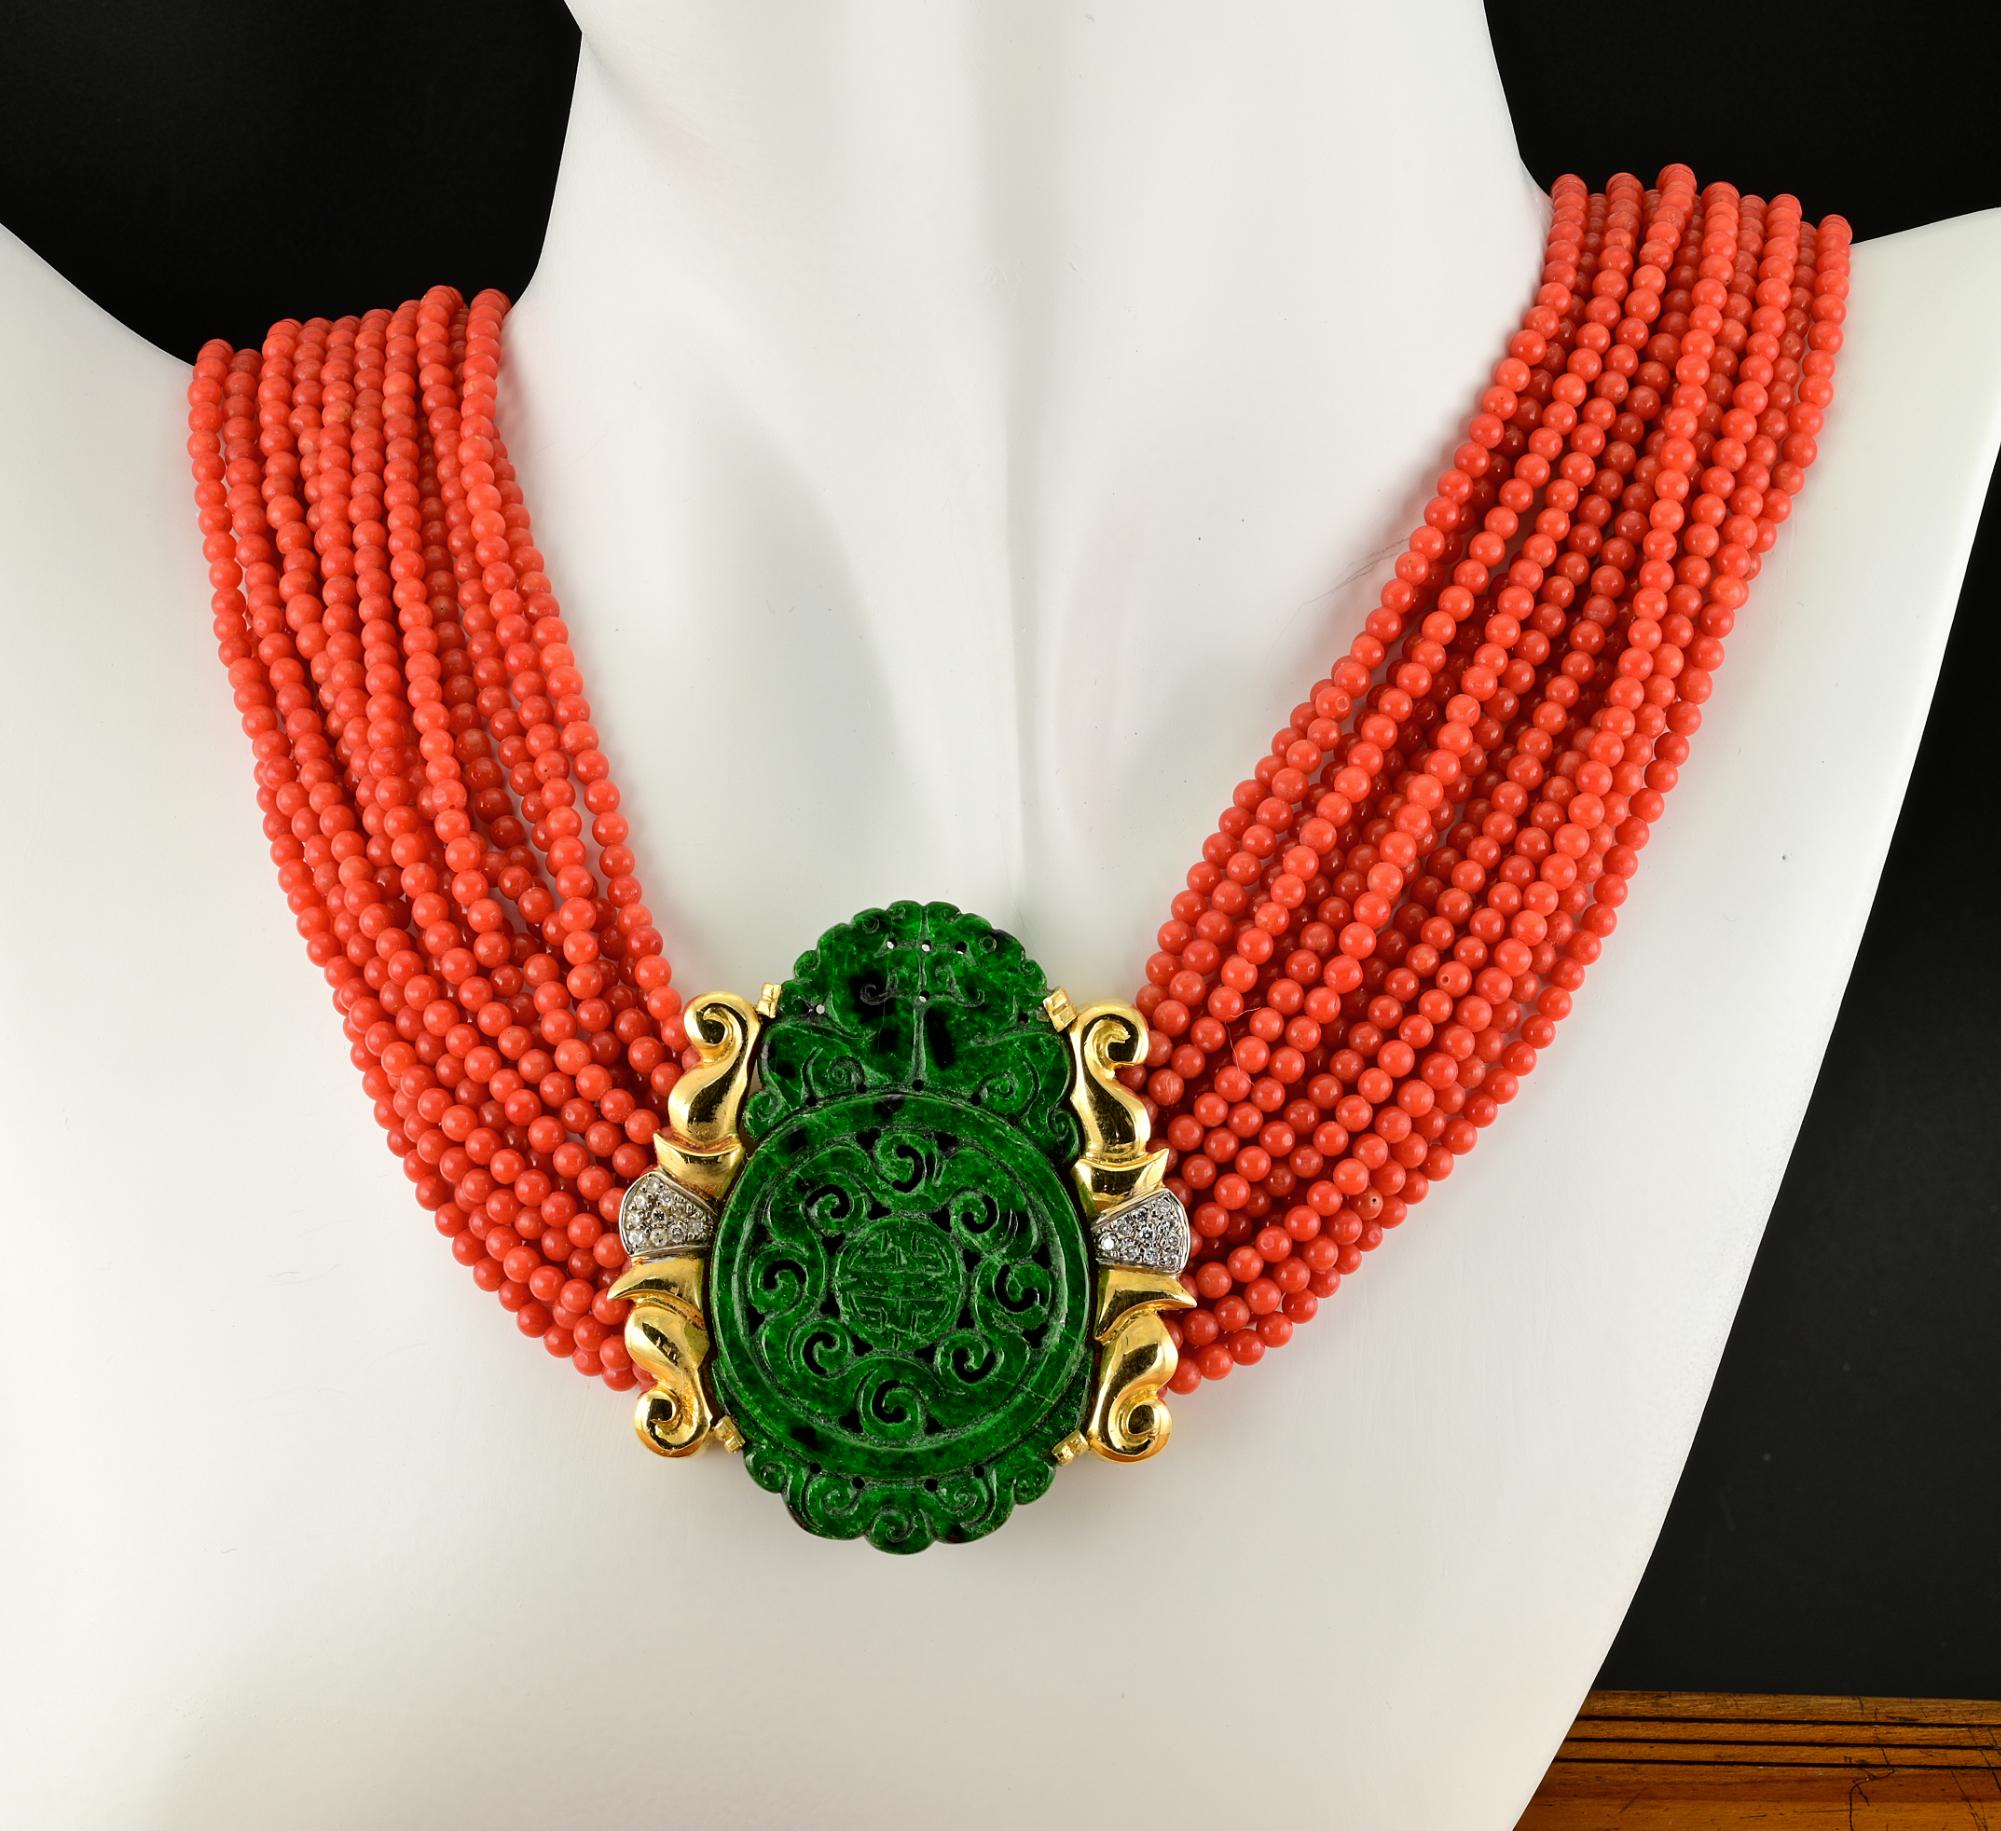 This outstanding Italian necklace is 1970 ca
Hand crafted as unique piece – no other existing like this – 18 KT gold
The necklace is composed by 16 multi-strand of Red Tomato color natural Coral,  beads size average 3 mm. in diameter
Centerpiece is